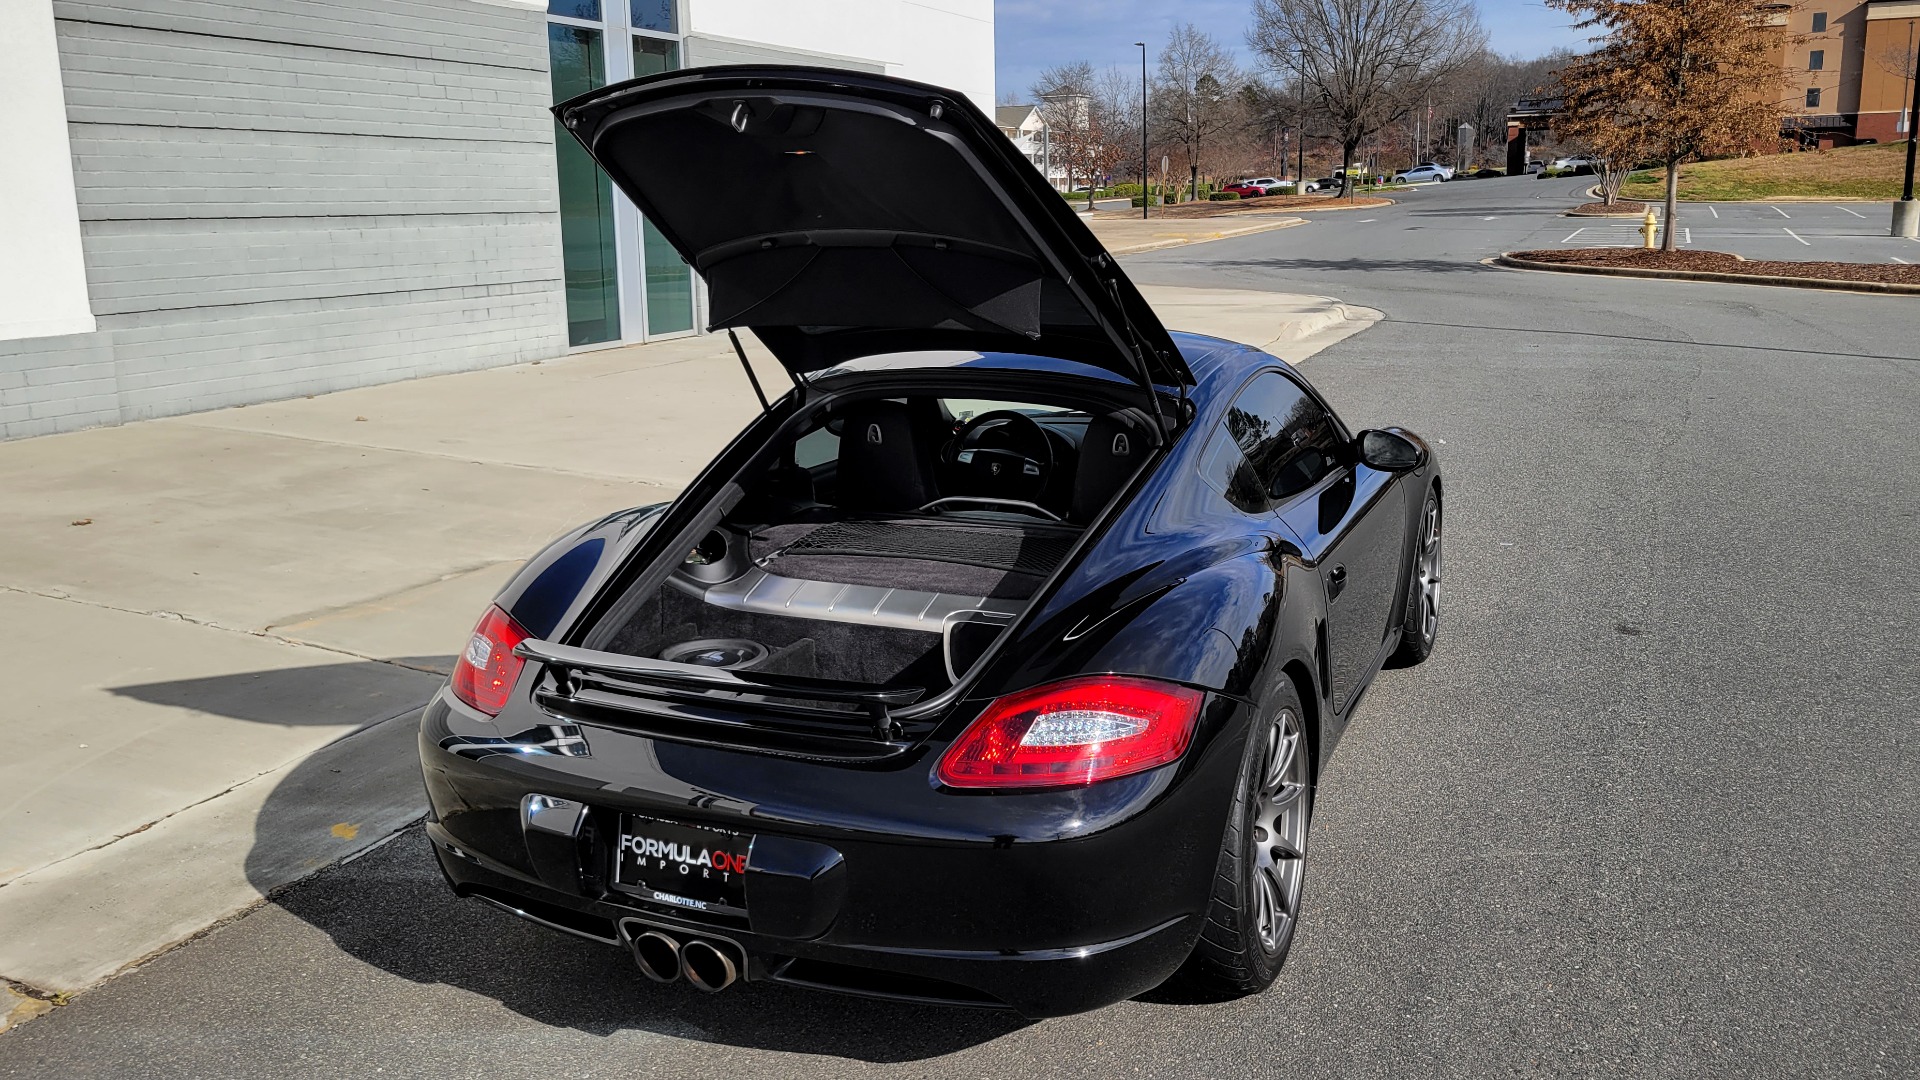 Used 2007 Porsche CAYMAN COUPE 2.7L / 5-SPD MANUAL / HTD STS / AIR COND / JL AUDIO / BORLA EXH for sale $25,999 at Formula Imports in Charlotte NC 28227 25